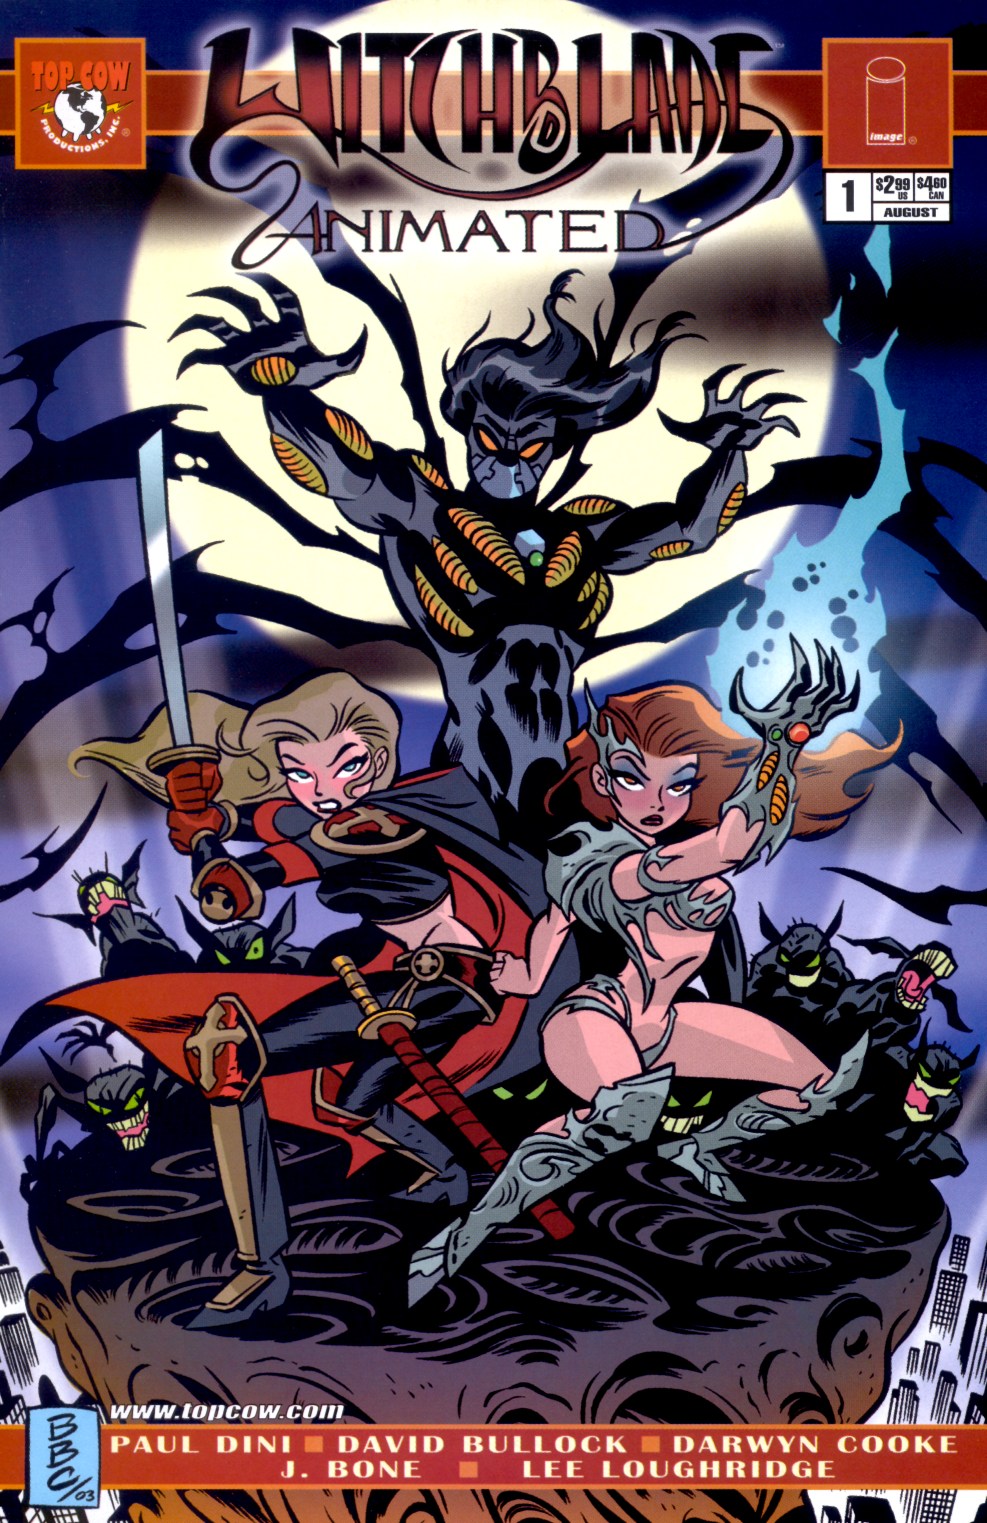 Read online Witchblade Animated comic -  Issue # Full - 1